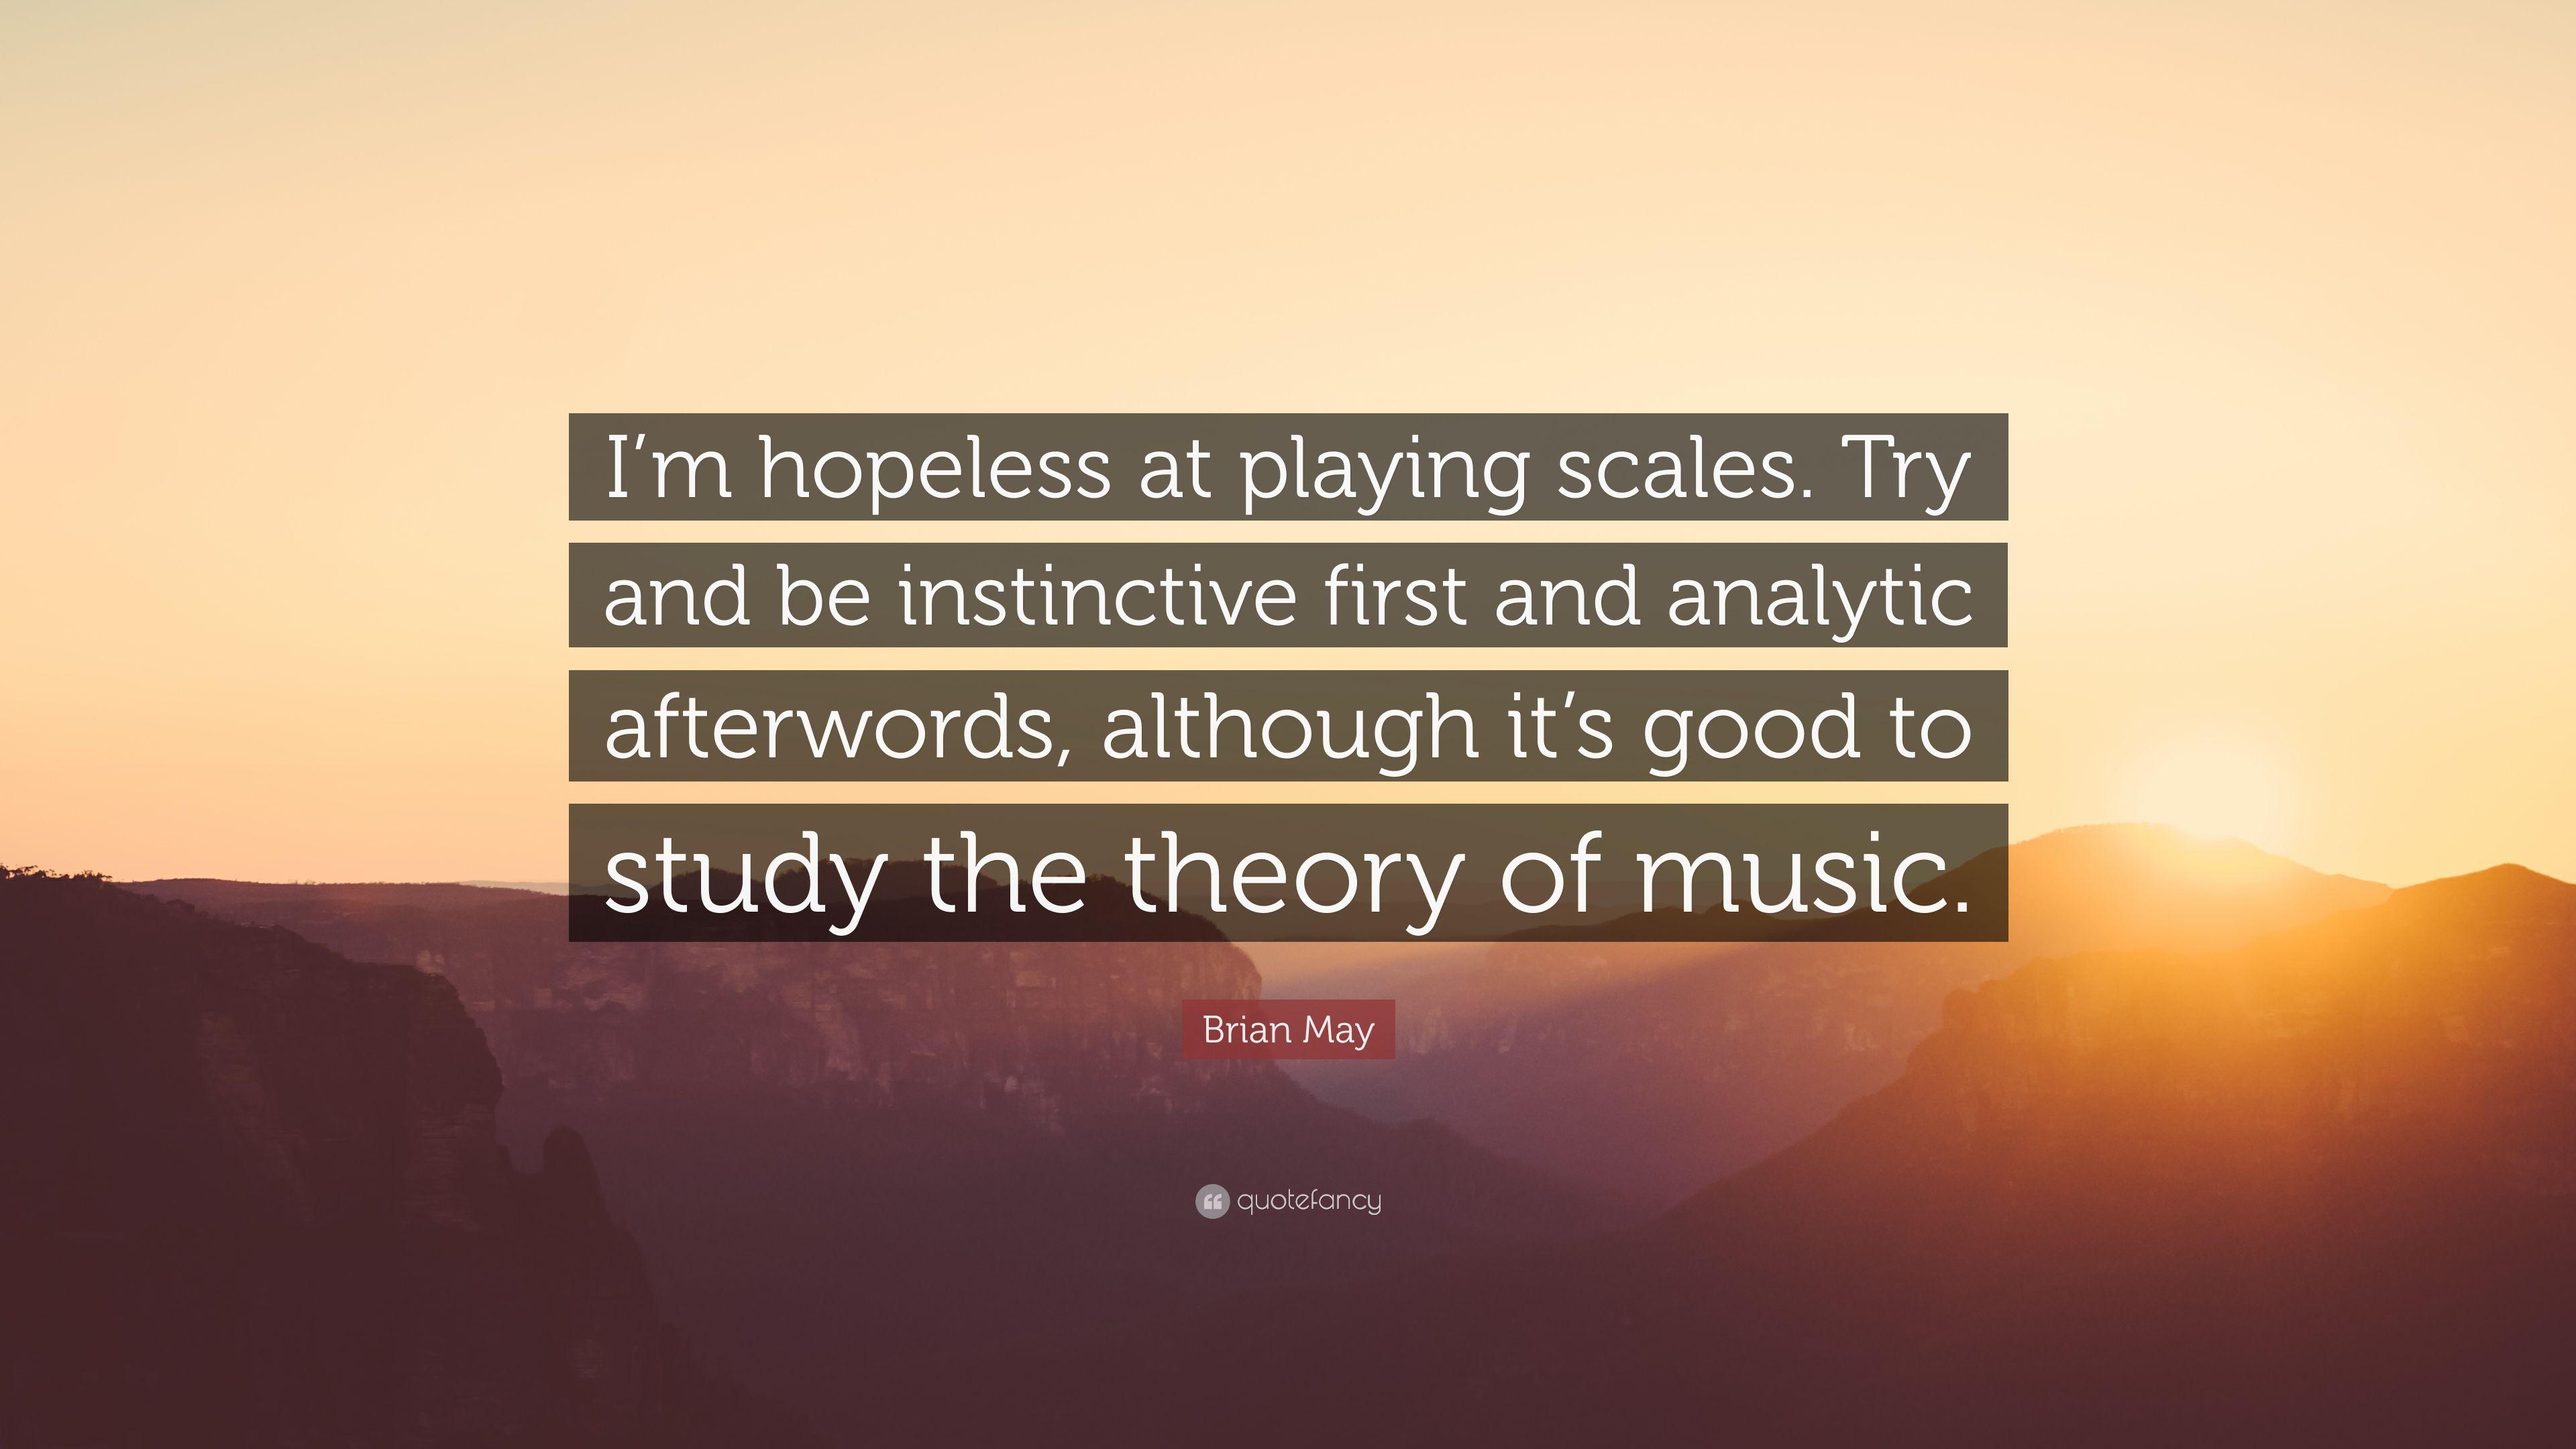 Brian May Quote: “I'm hopeless at playing scales. Try and be